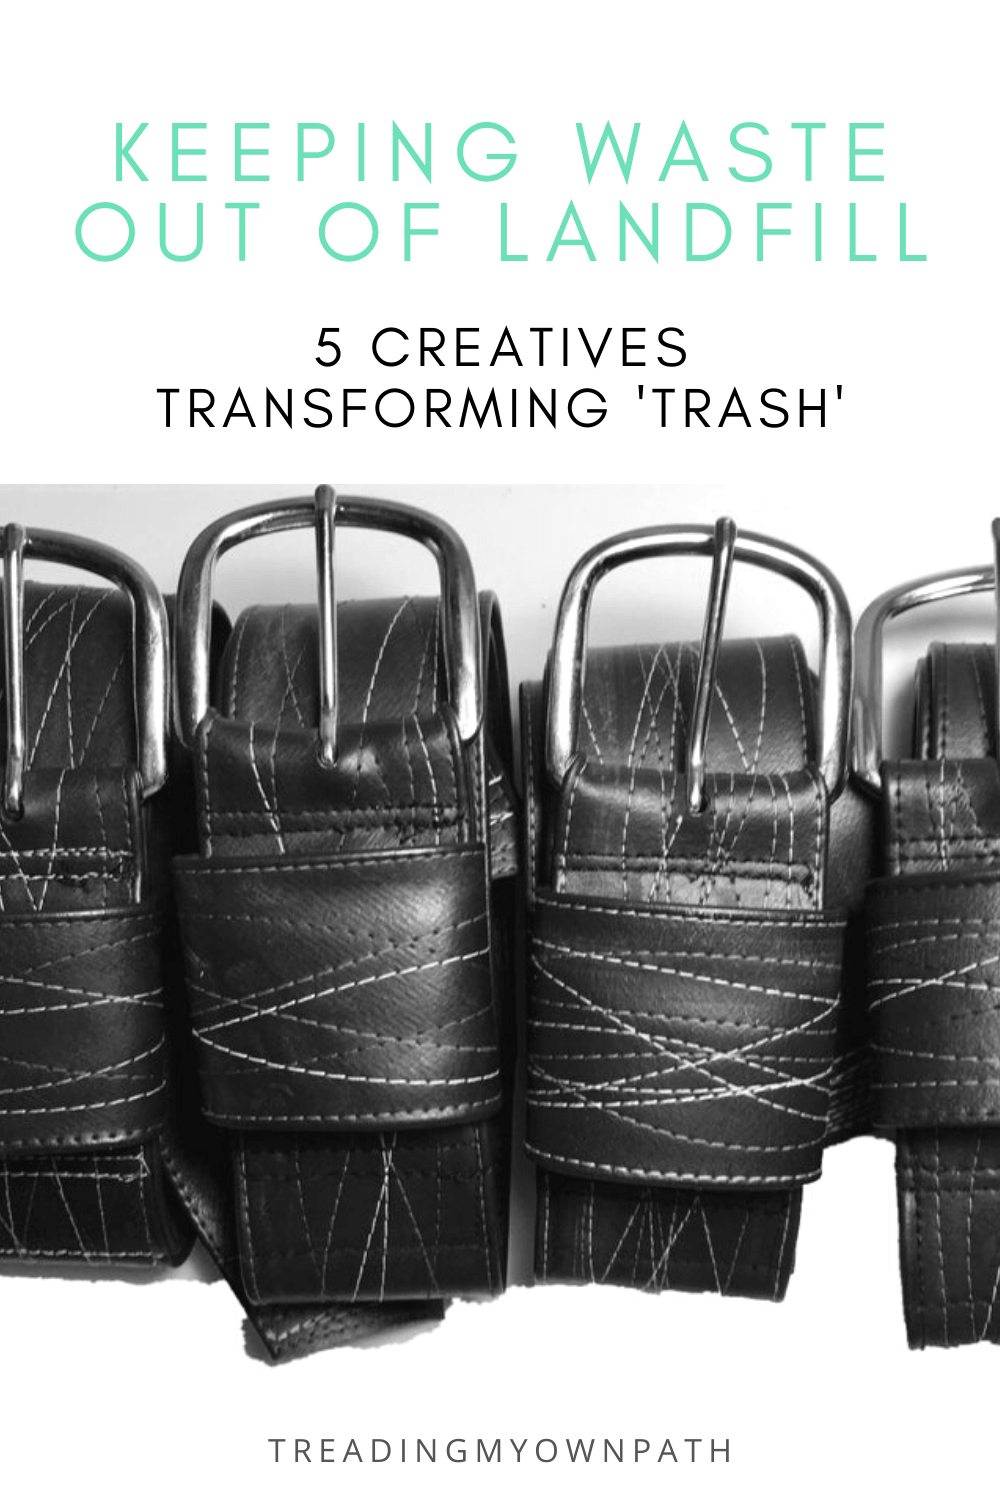 Keeping waste out of landfill: 5 creatives transforming \'trash\' into useful stuff